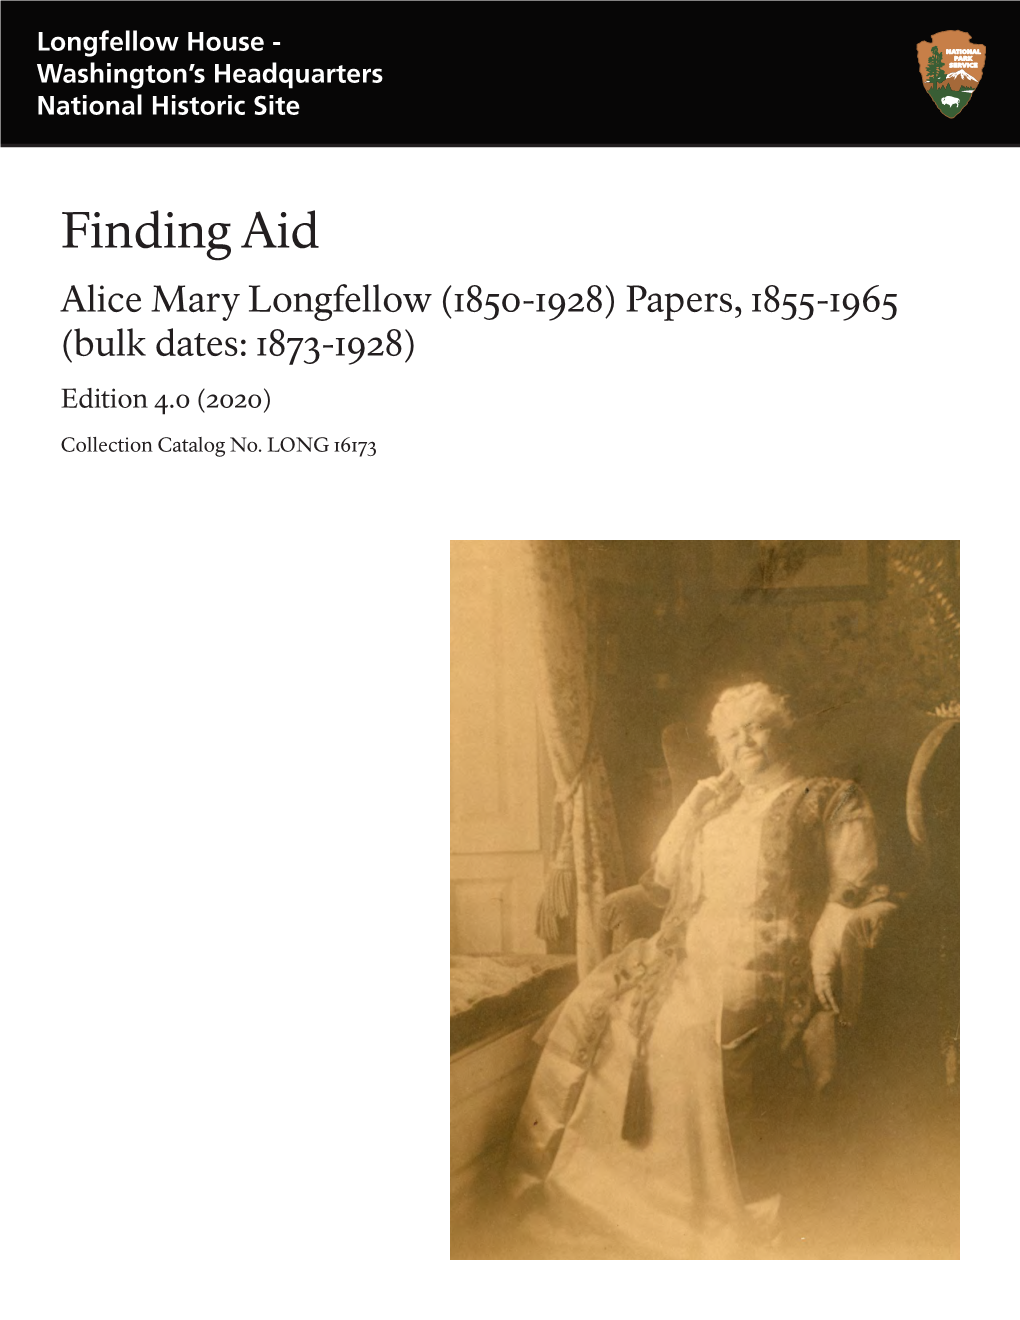 Finding Aid to the Alice Mary Longfellow